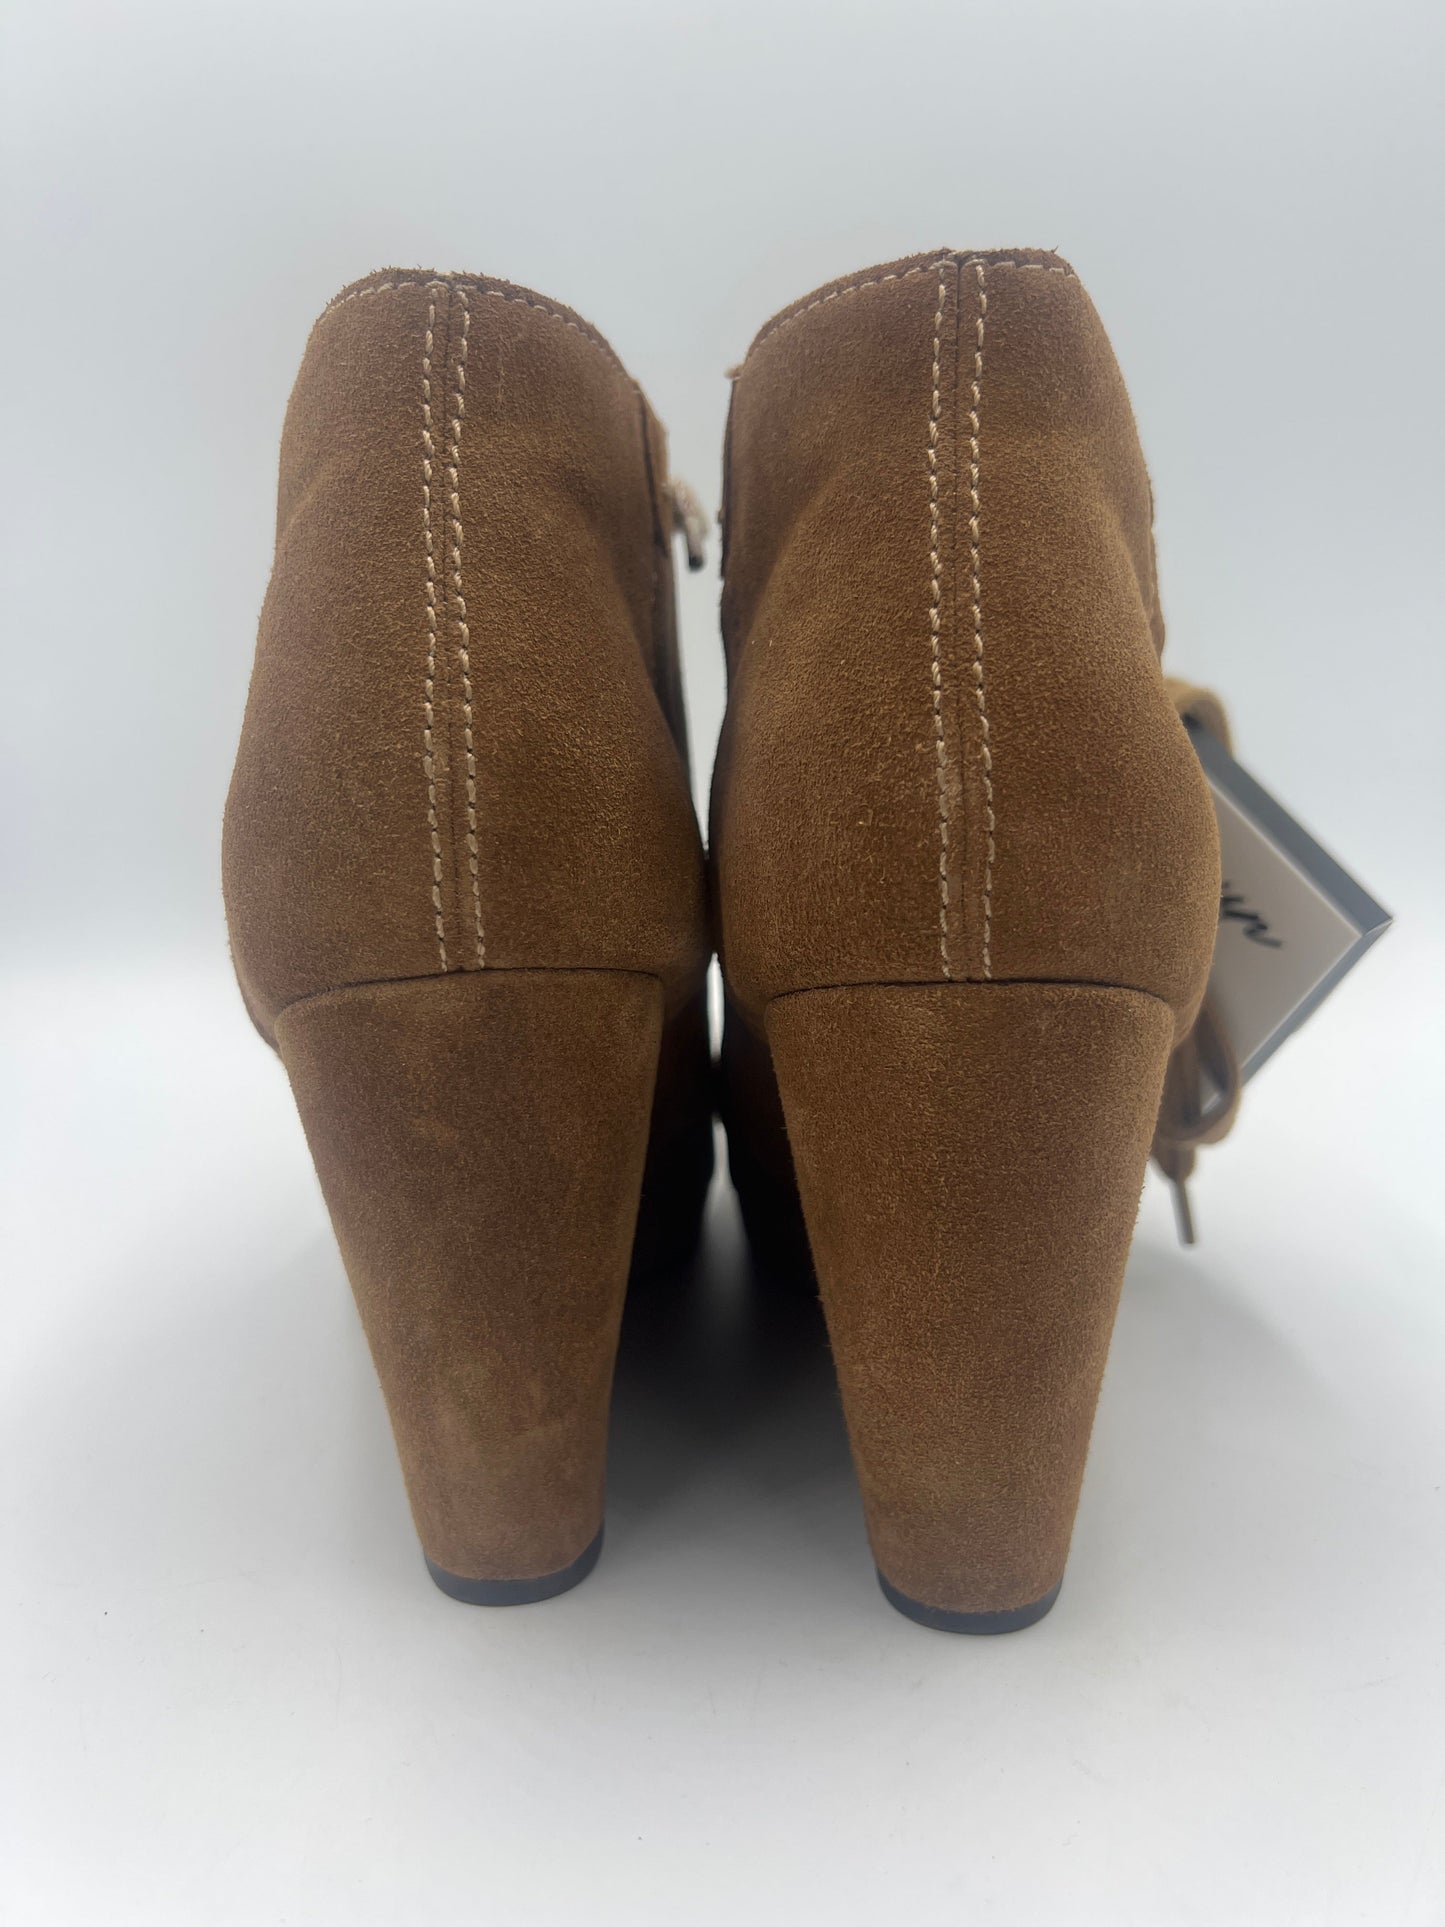 Boots Ankle Heels By Dolce Vita  Size: 10